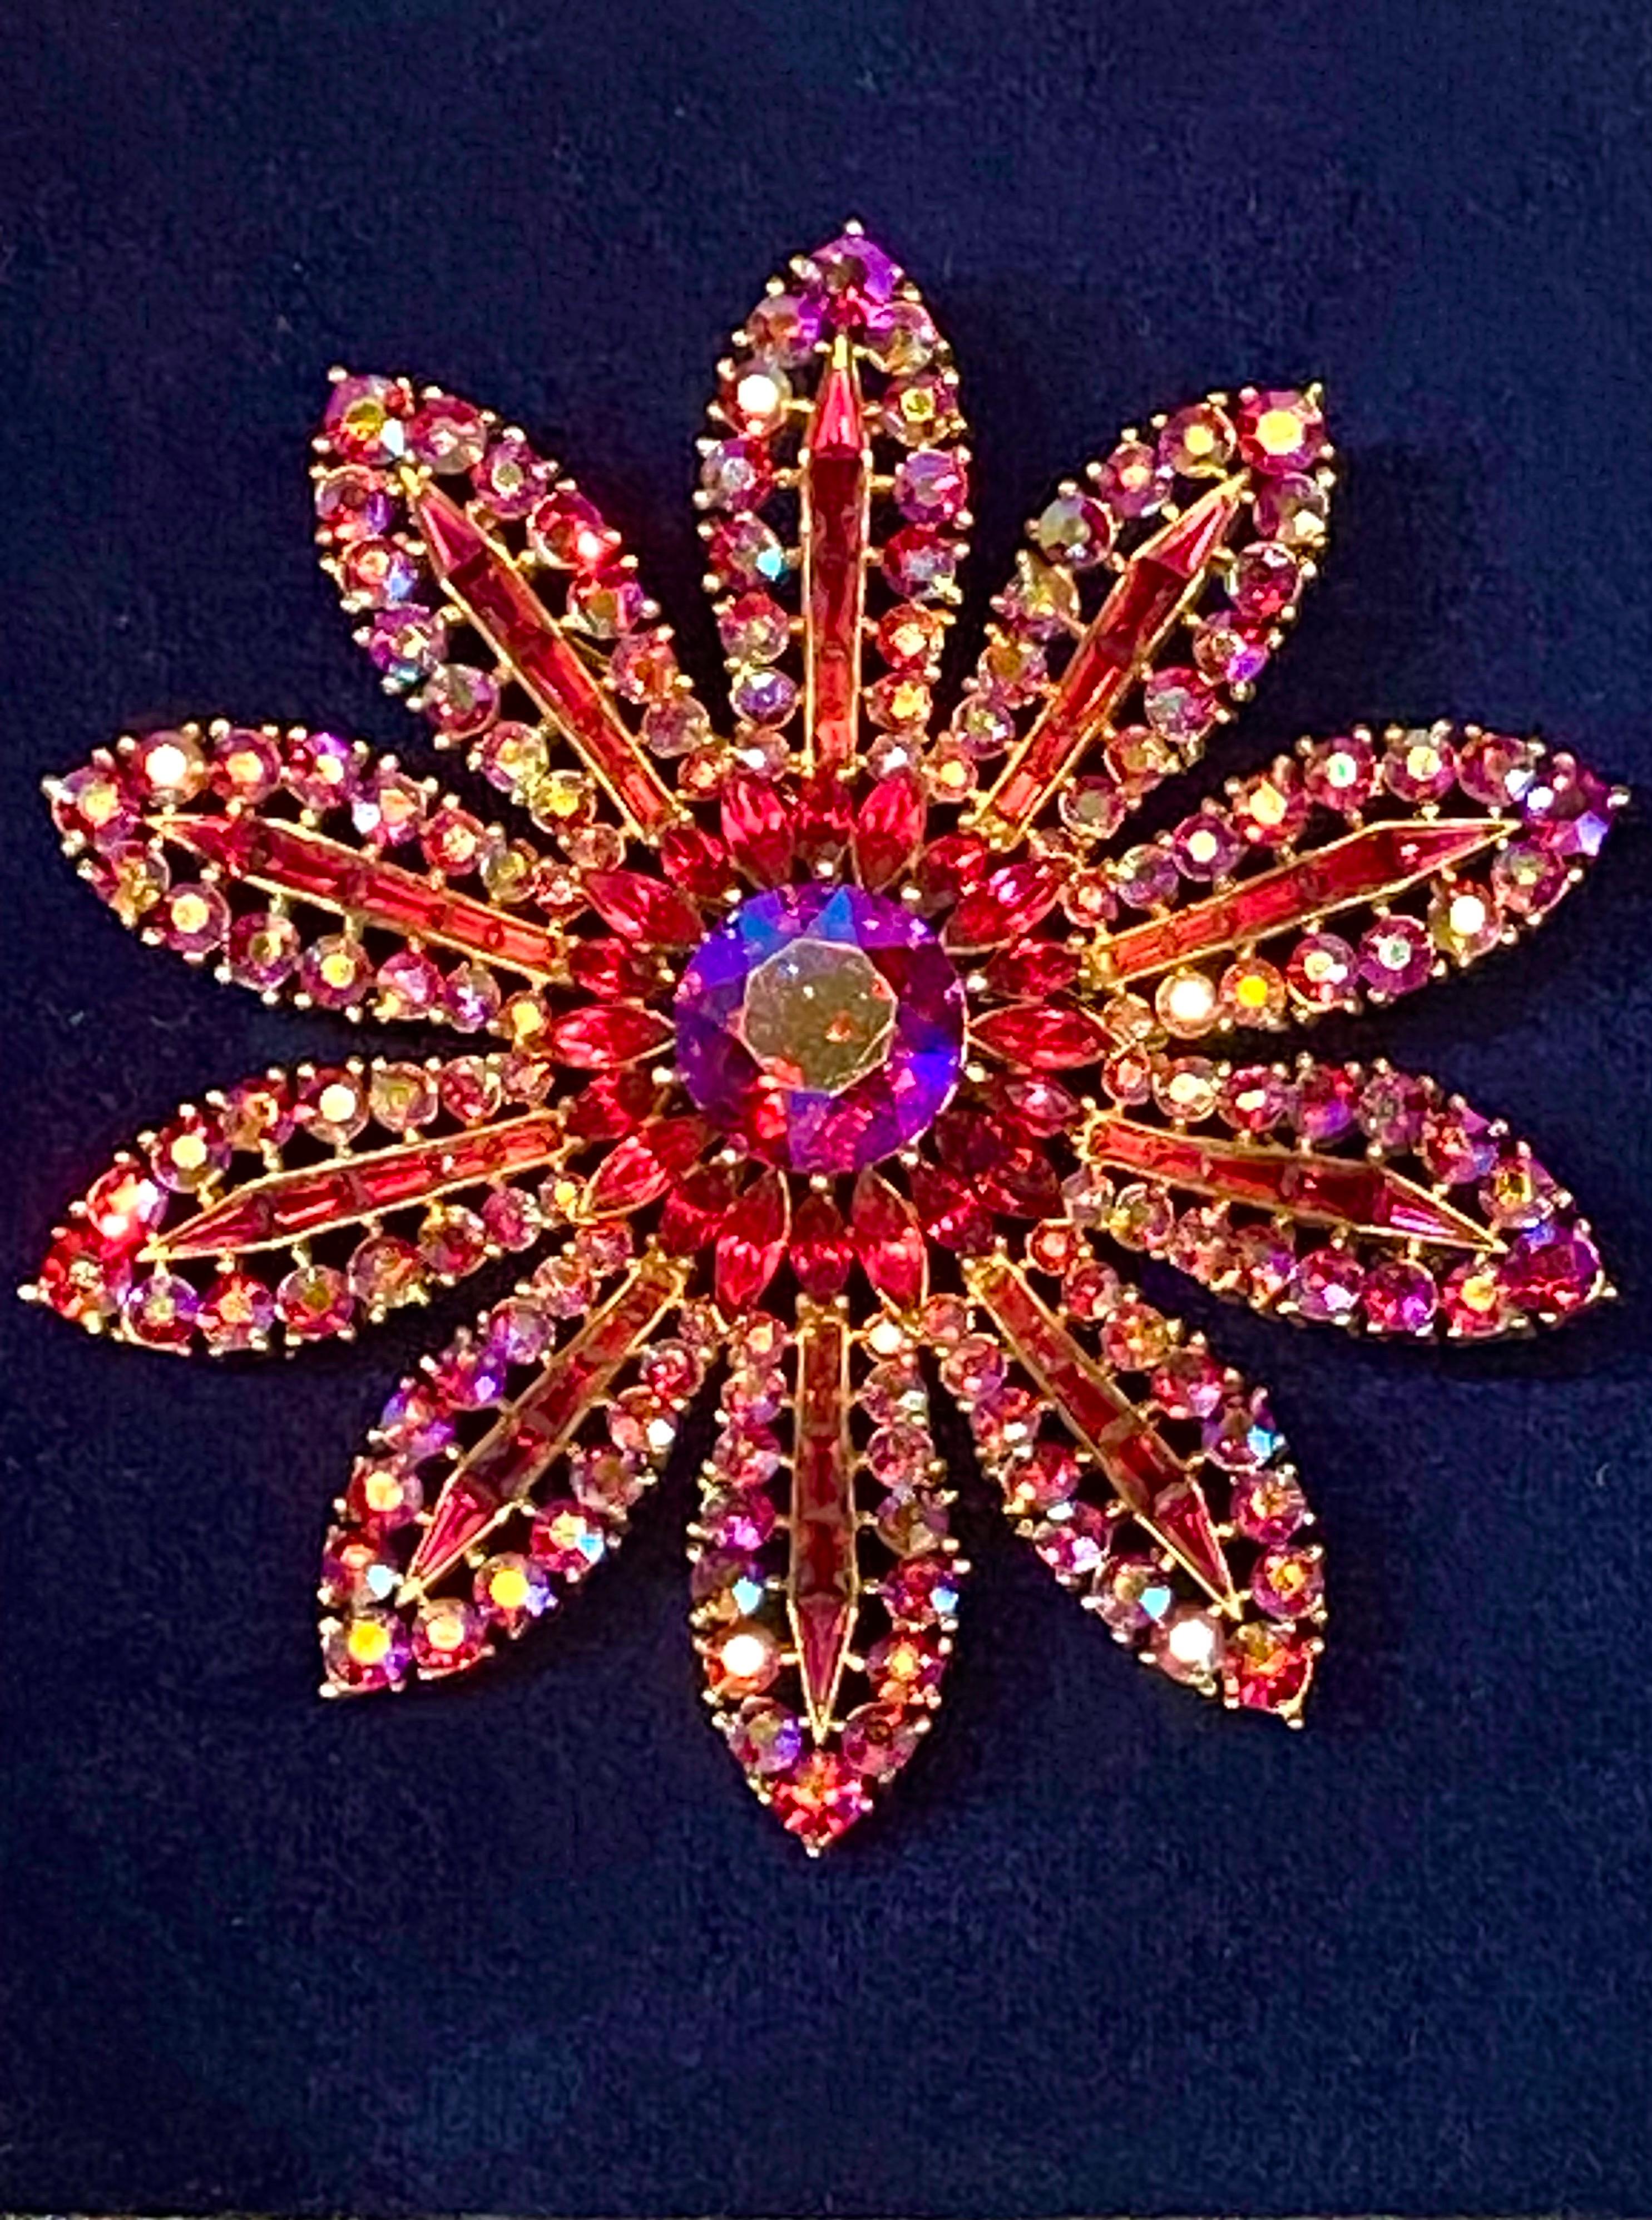 This Trifari pin is a stunning piece dating from the mid 1950s. It has the crown Trifari mark with c in a circle copyright mark dating seen on pieces from 1955 to 1969. This 3.25 inch diameter large margarita flower is a rare Trifari design not